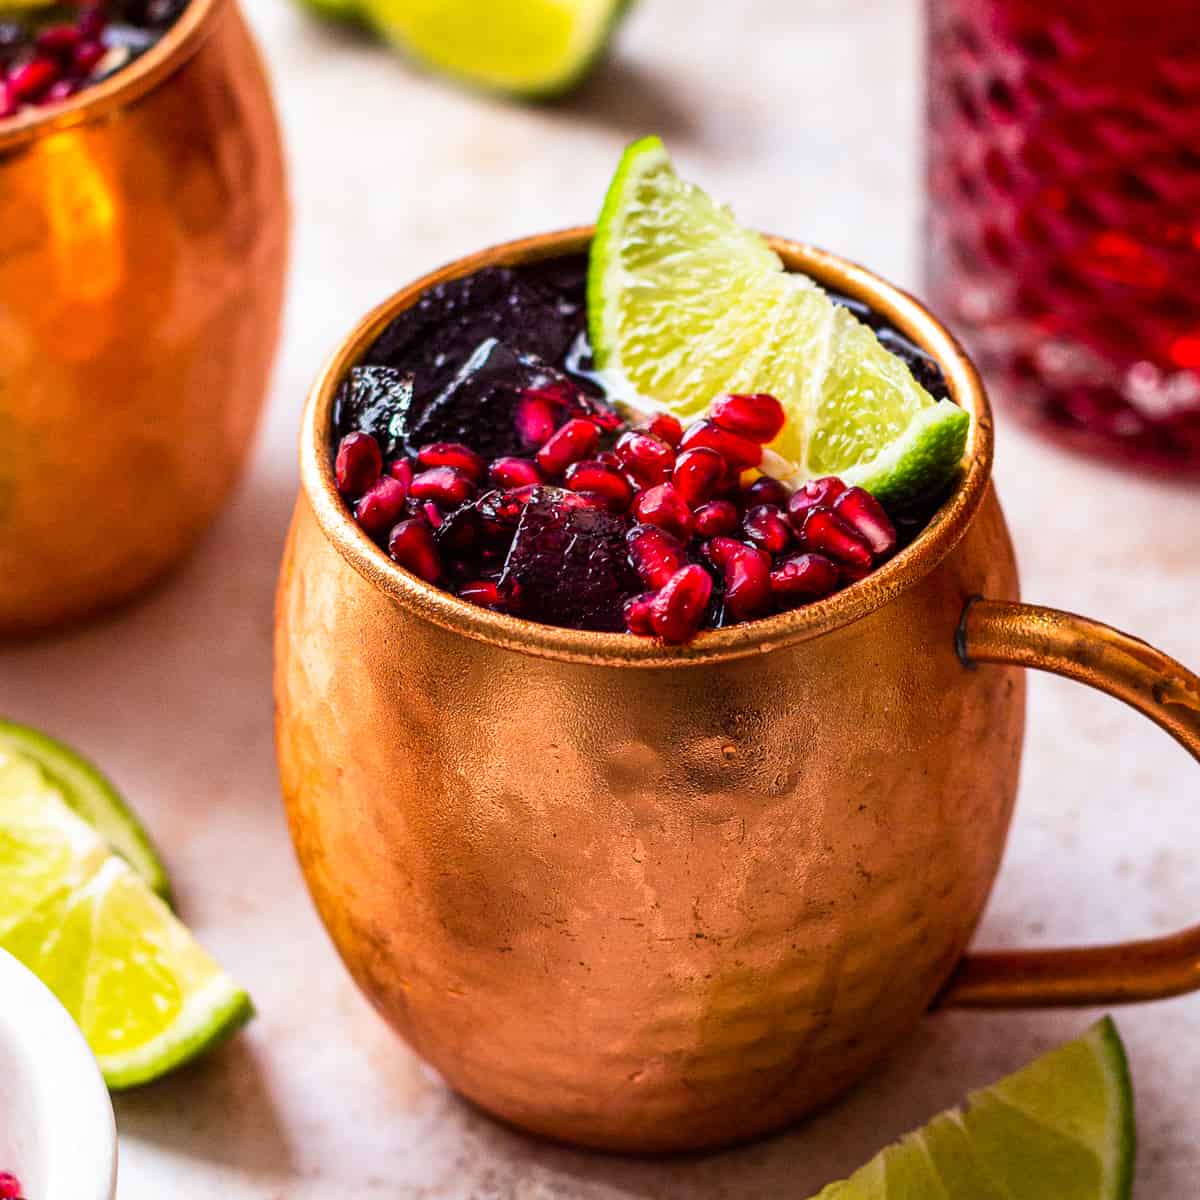 https://www.thecookierookie.com/wp-content/uploads/2014/10/featured-pomegranate-moscow-mule-recipe.jpg